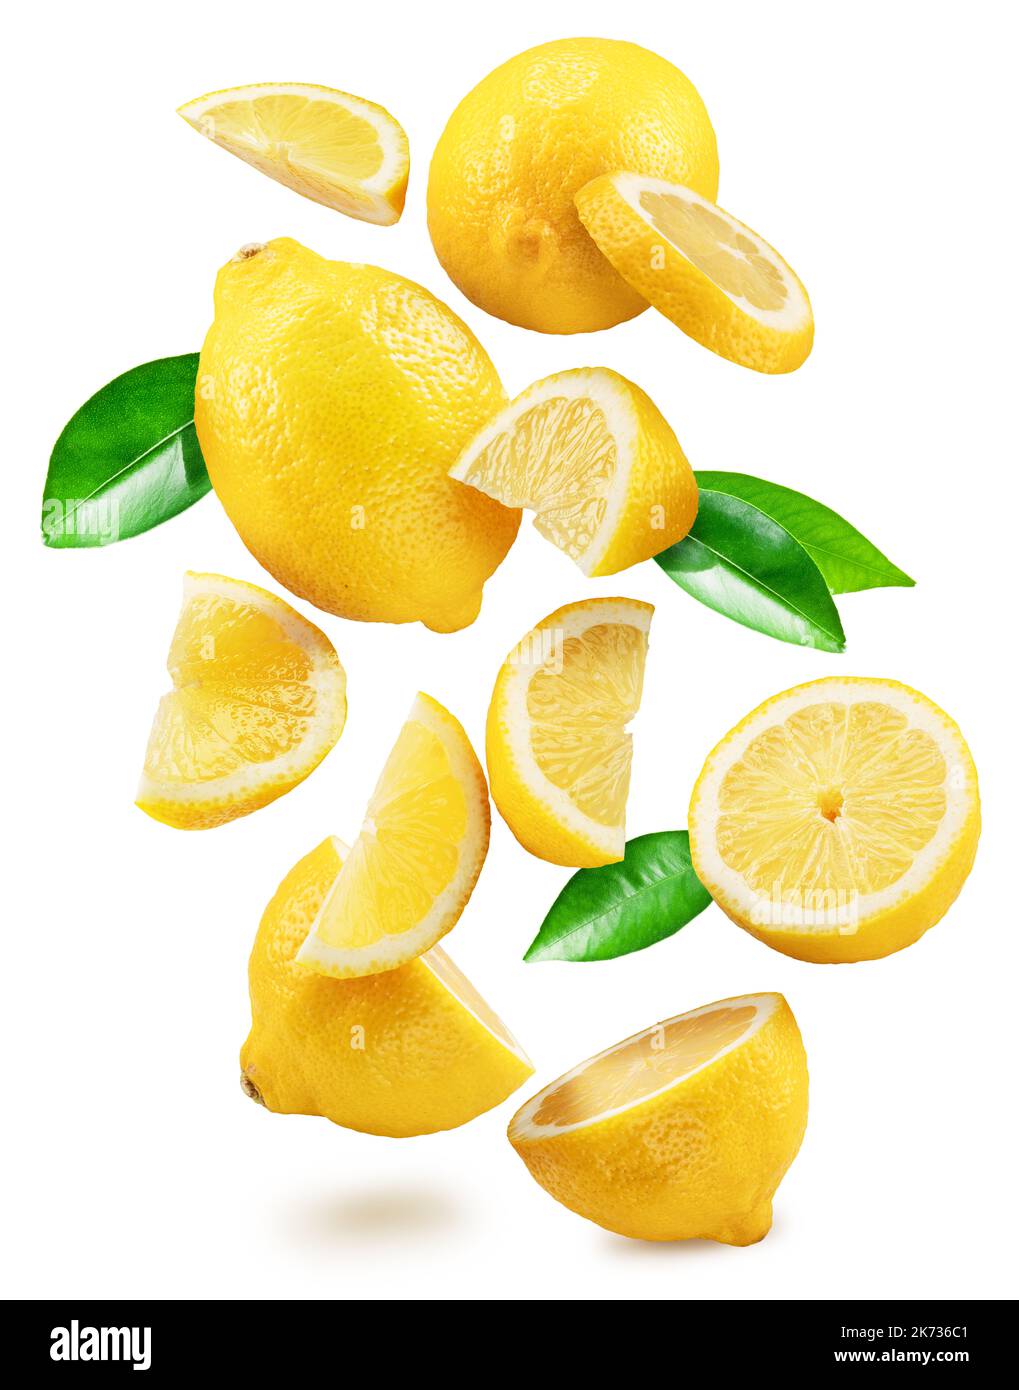 Ripe lemon fruits, slices and leaves flying in air white background. File contains clipping paths. Stock Photo